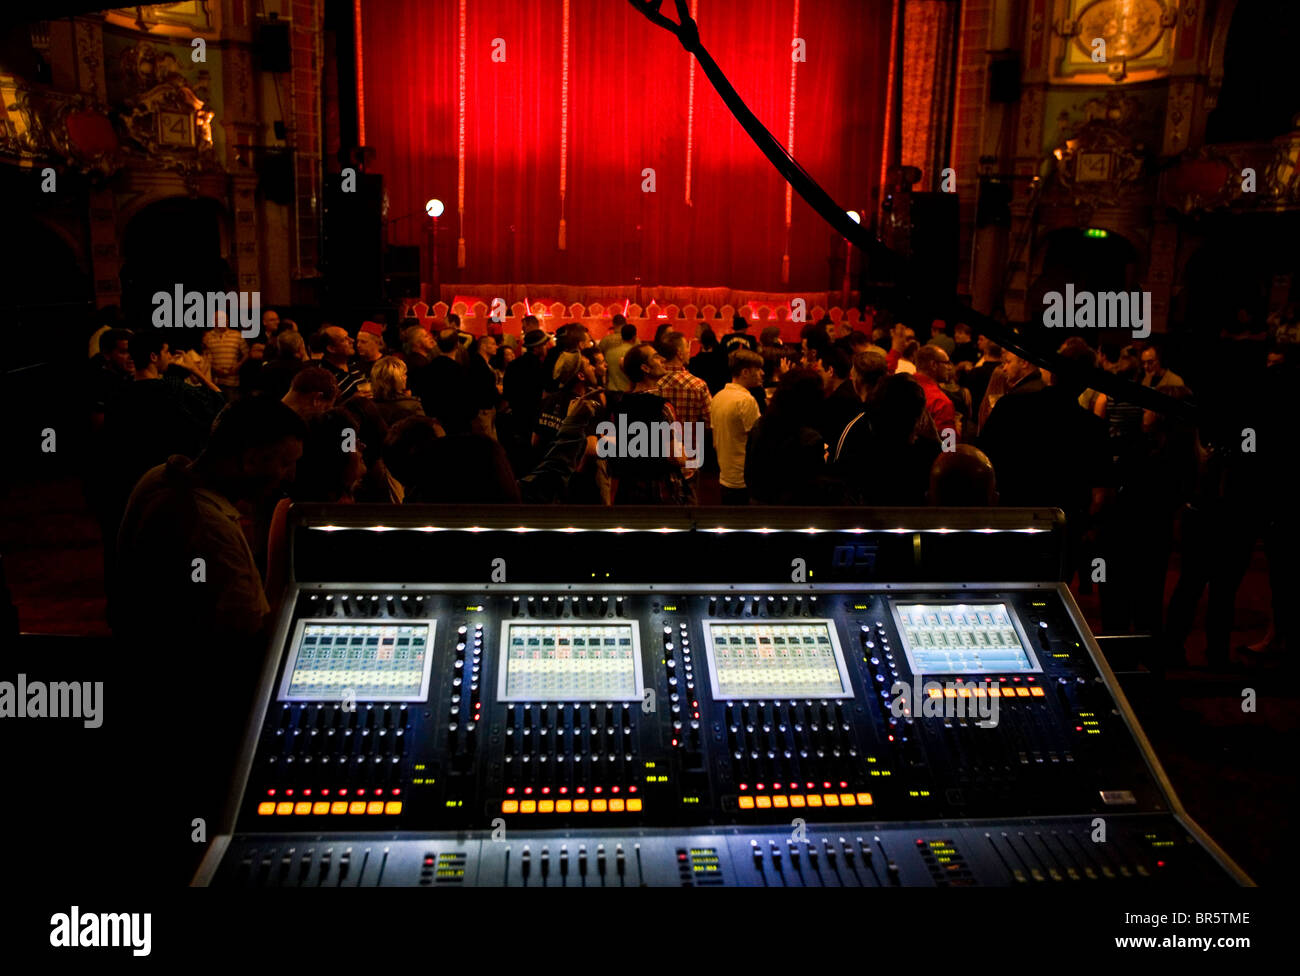 The mixing desk at the Hackney Empire. Stock Photo